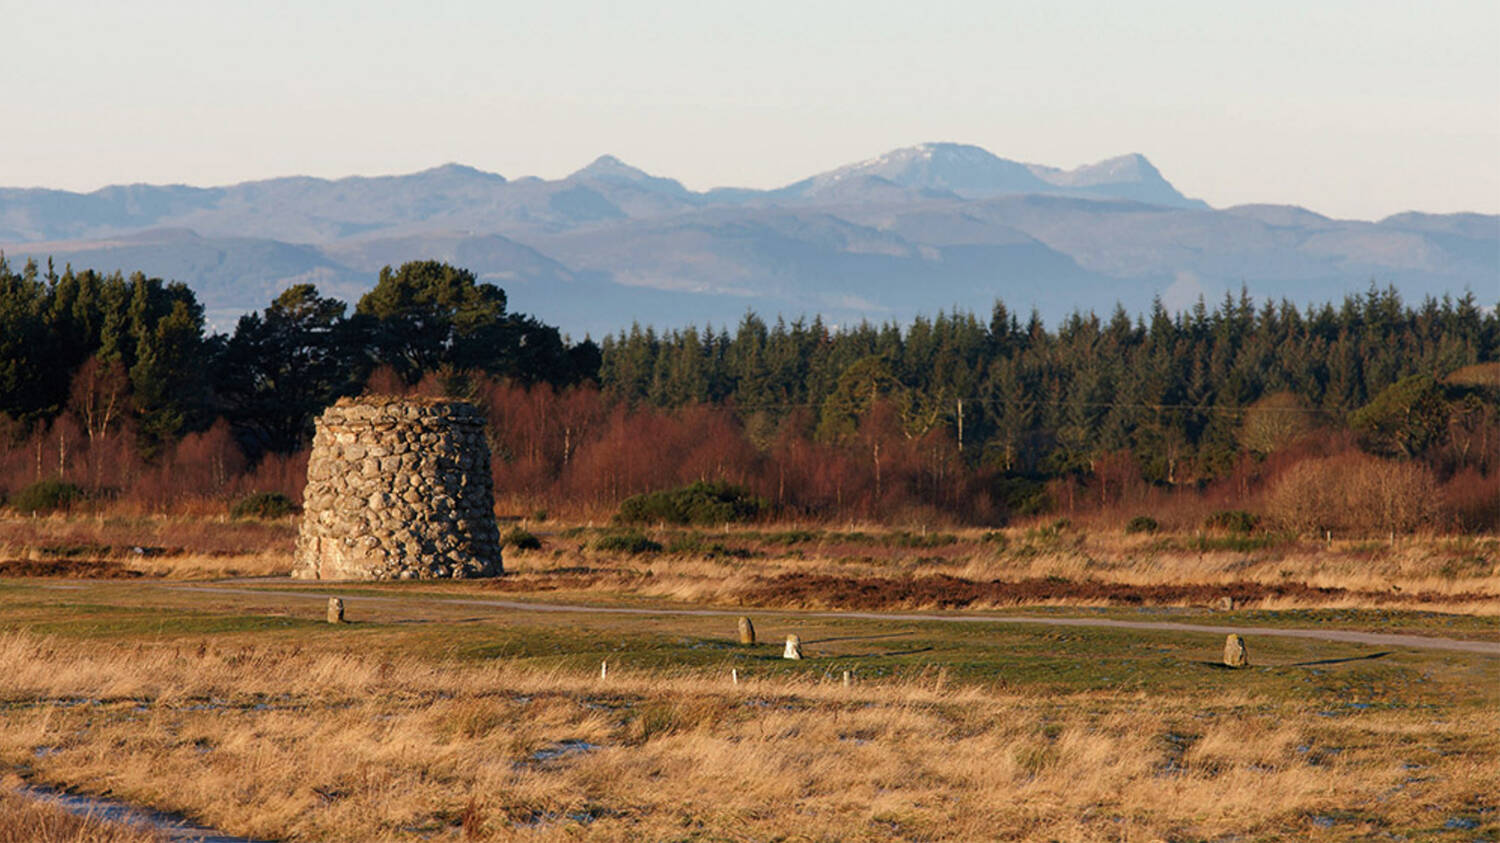 A large round stone cairn stands in the middle of a battlefield. Mountains and forests can be seen in the distance.